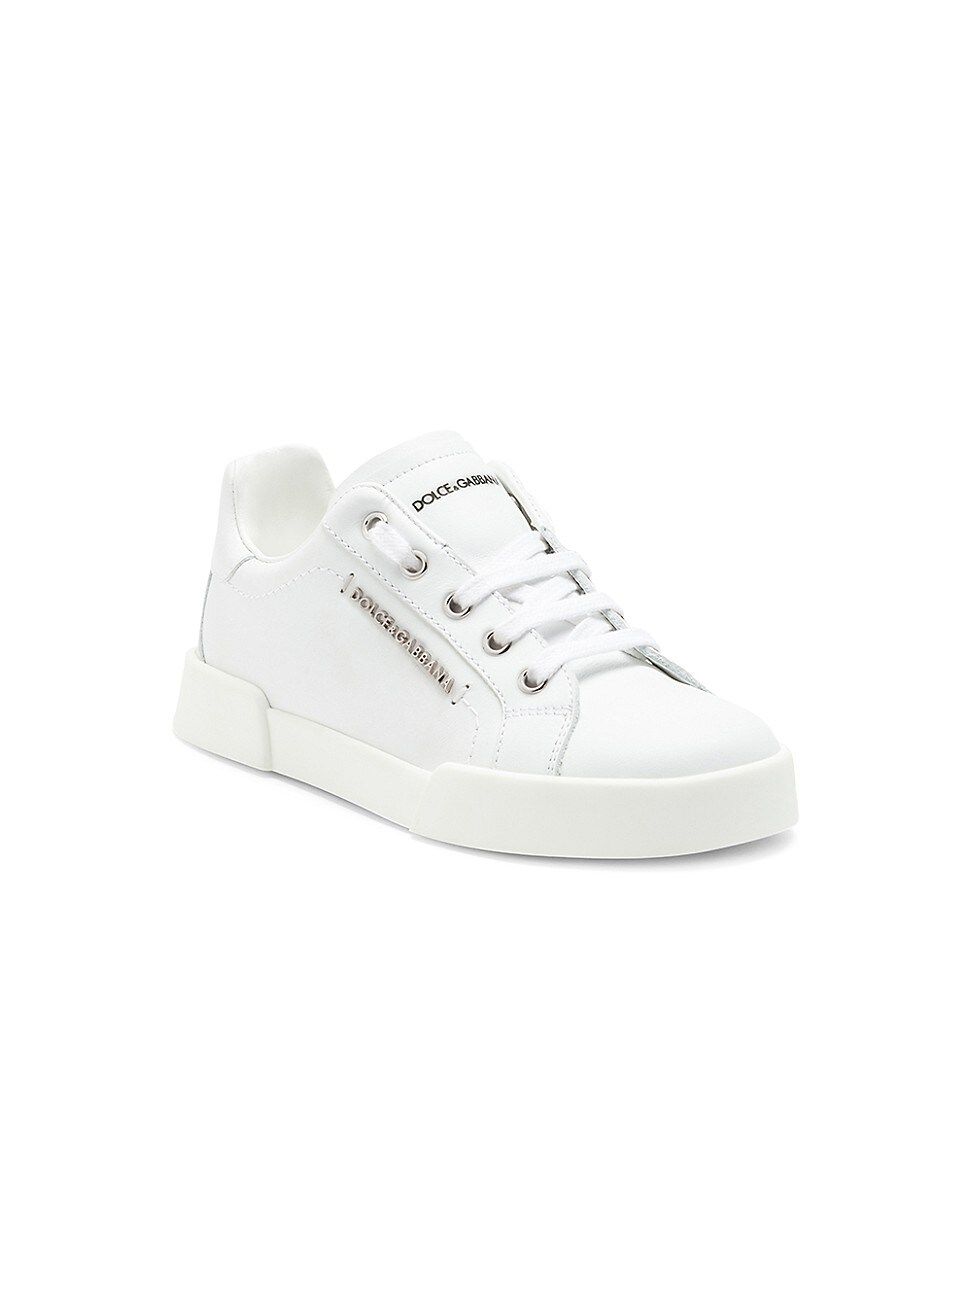 DOLCE & GABBANA Little Kid's & Kid's Leather Sneakers - White - Size 1 (Child) | Saks Fifth Avenue